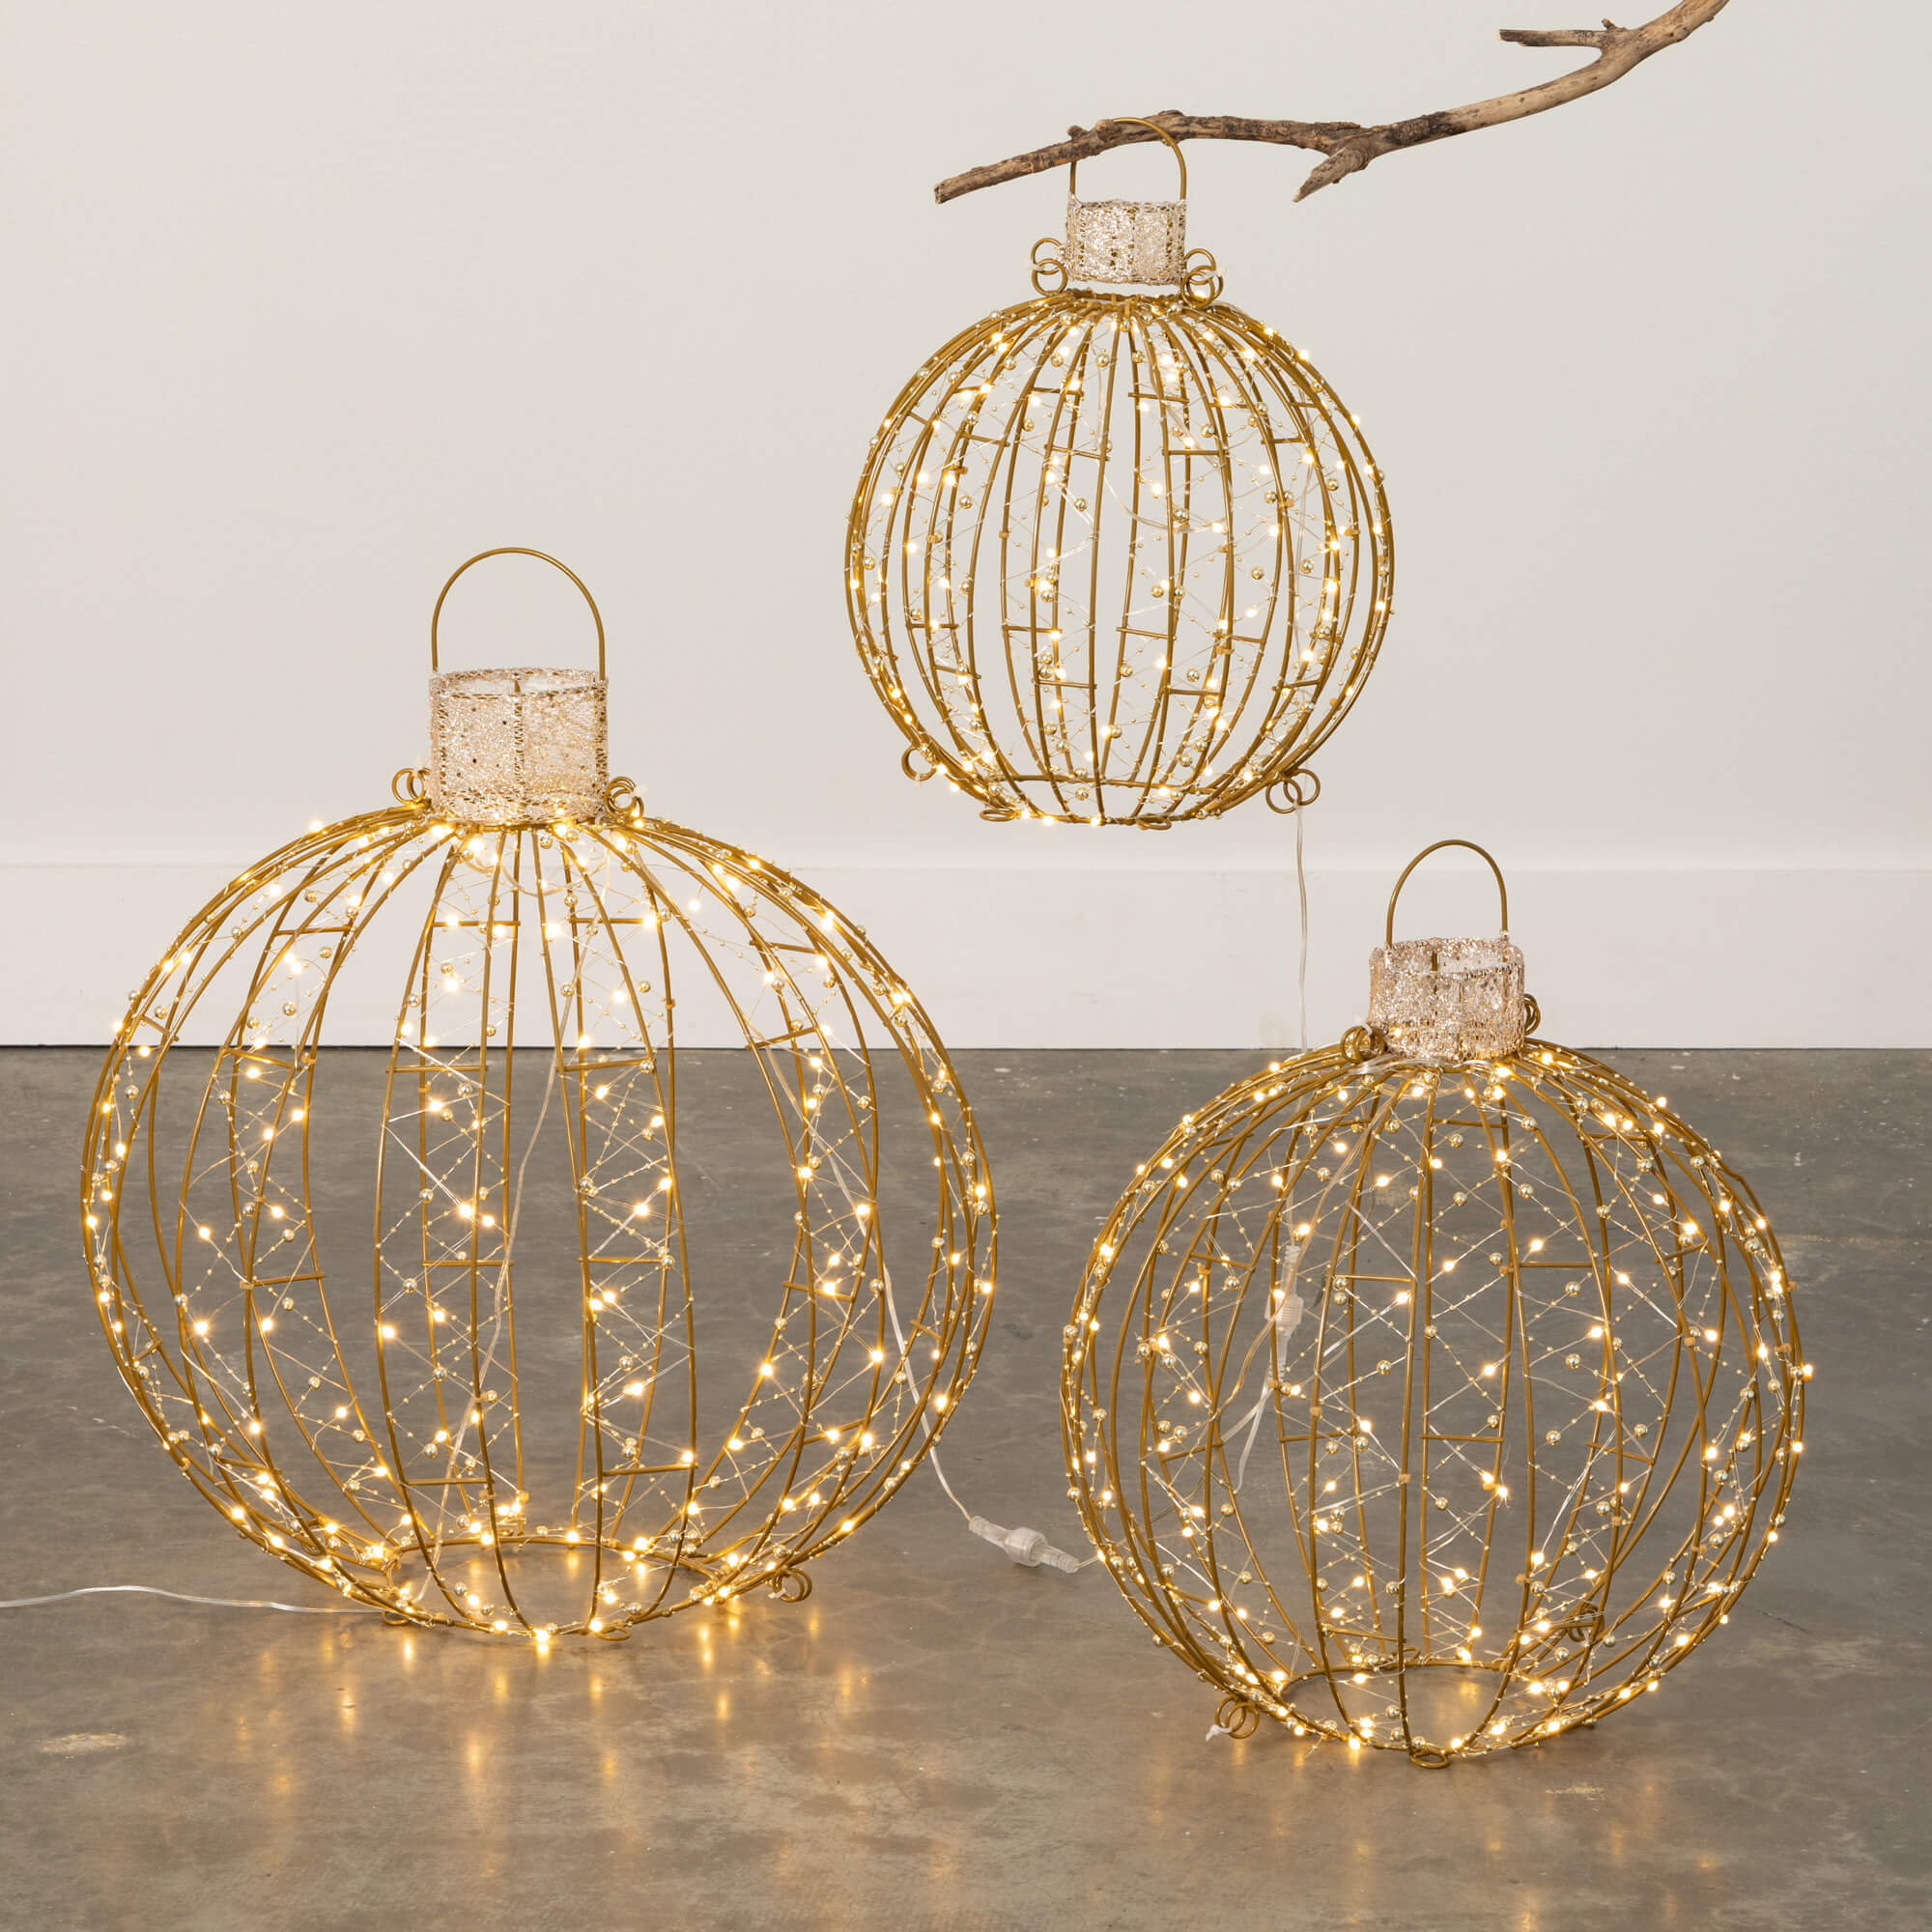 LIGHTED OUTDOOR BALL ORNAMENTS